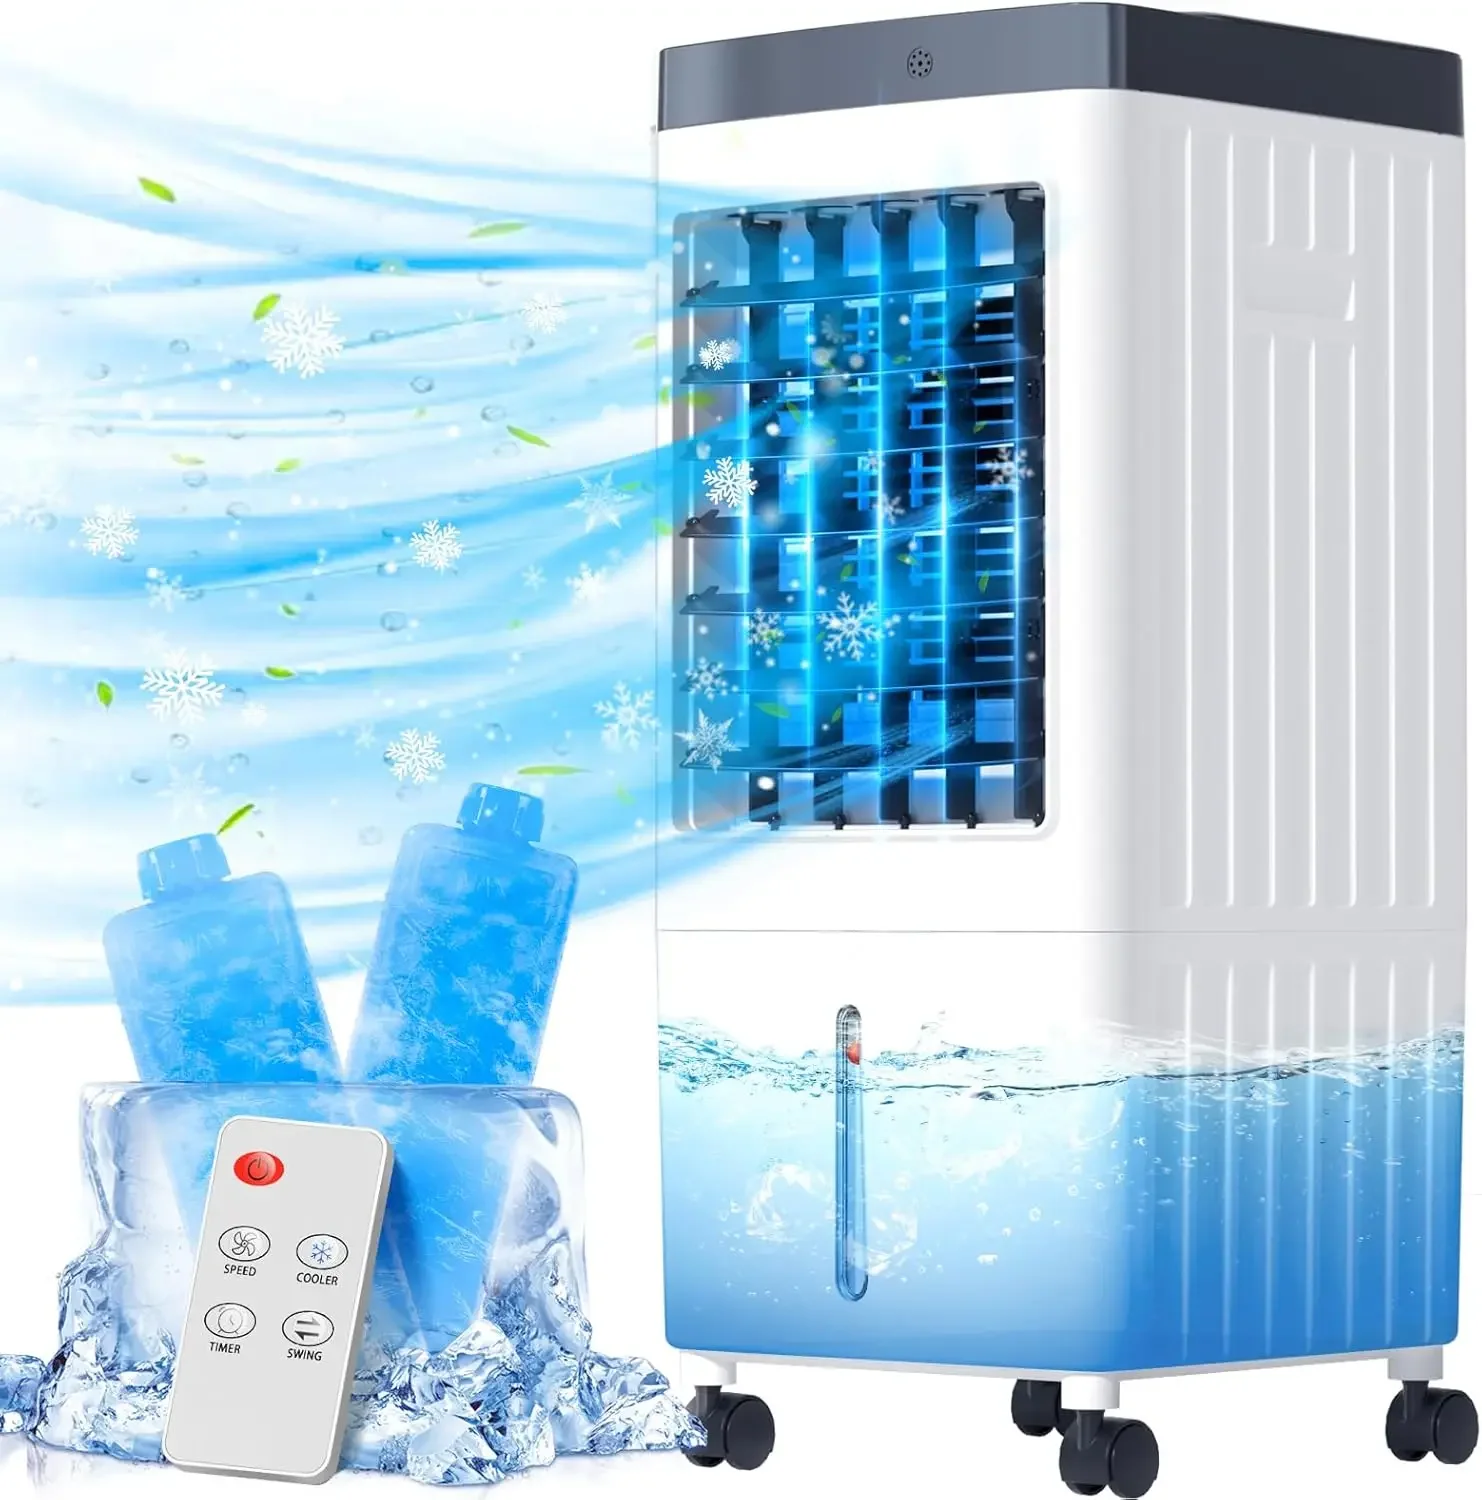 

3 IN 1 Powerful Evaporative Air Cooler with Remote Control, Fast Cooling Fan, Timer, and 3 Speeds - Air Conditioner Unit with 2